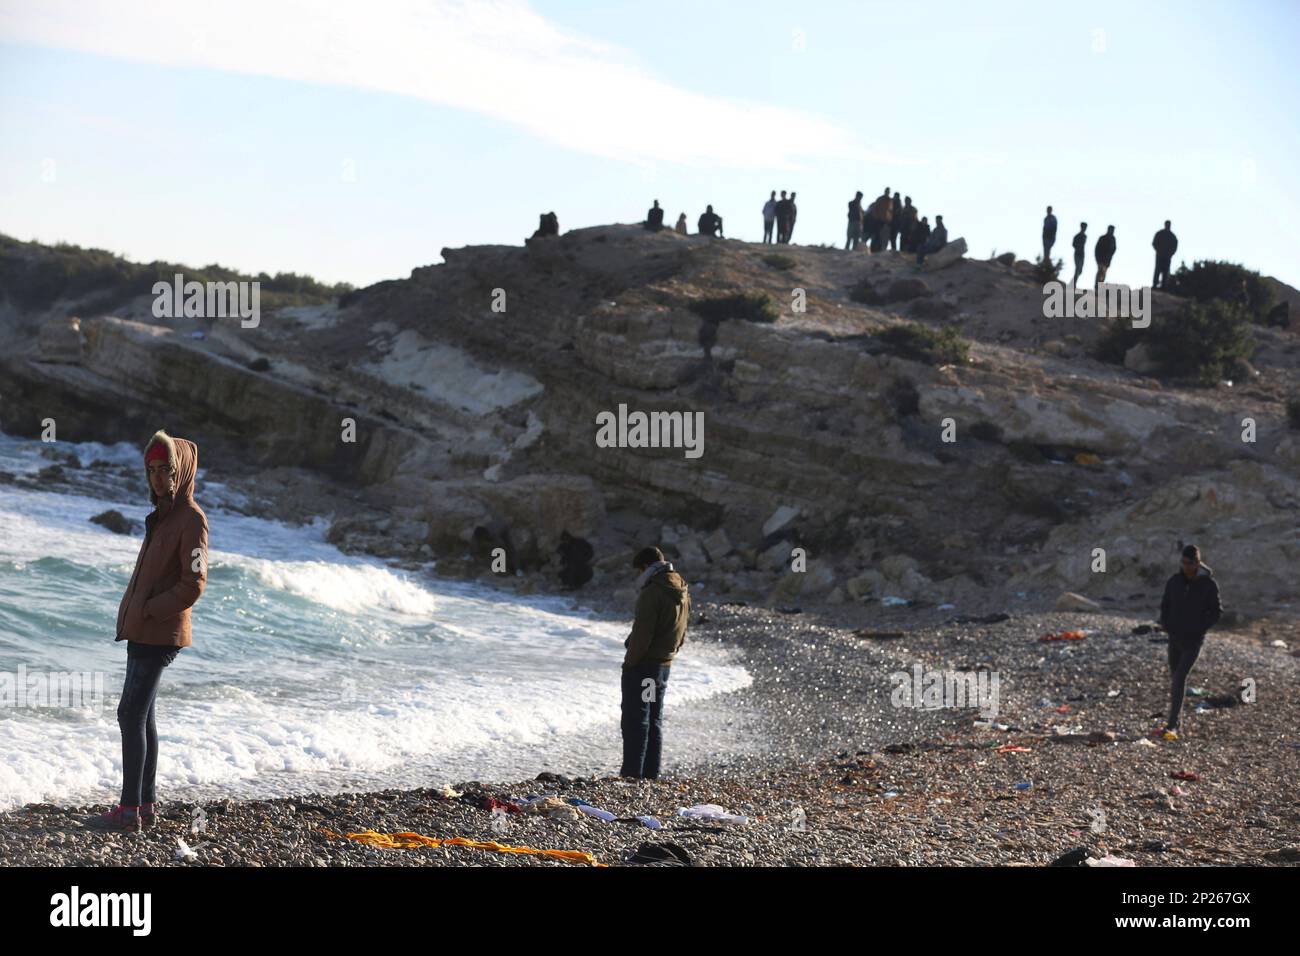 Migrants and refugees watch the rough sea as they wait to cross to the  Greek island of Chios, near Cesme, Turkey, Sunday, Nov. 1, 2015. Greek  authorities recovered more bodies on the